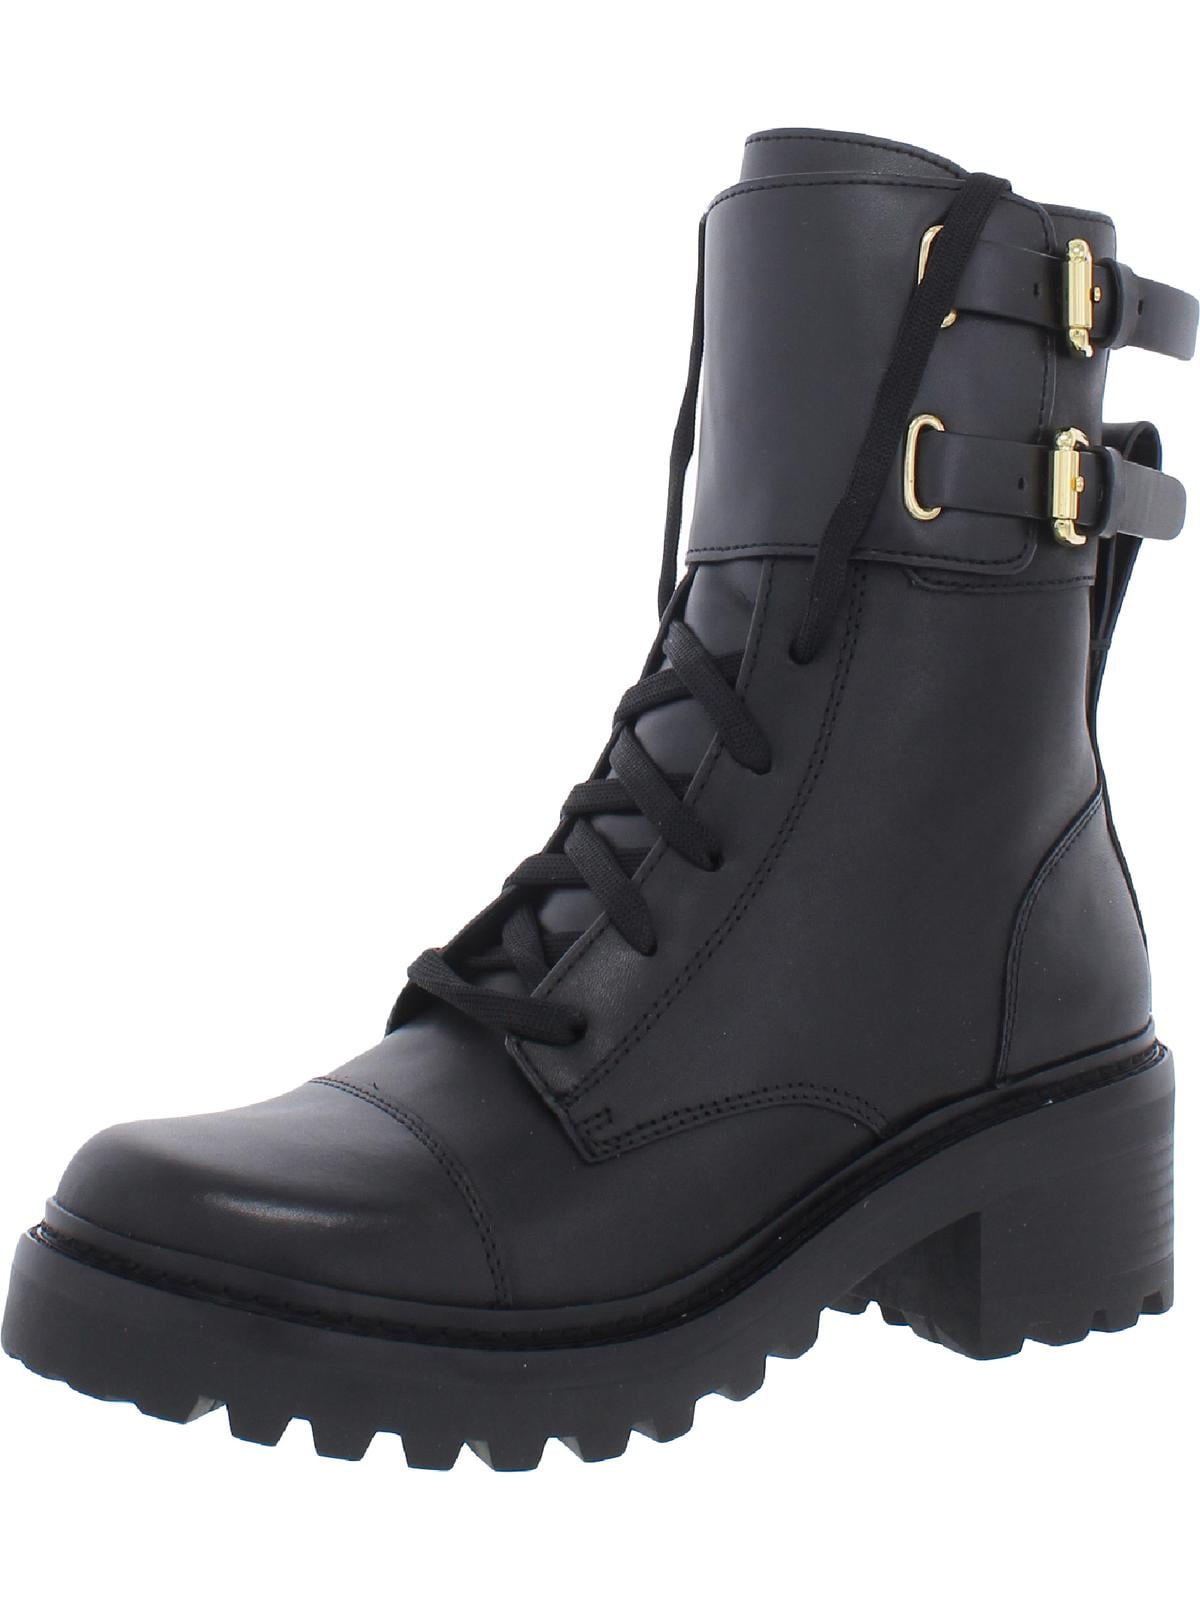 DKNY Womens Bart Lugged Sole Buckle Combat & Lace-up Boots - Walmart.com